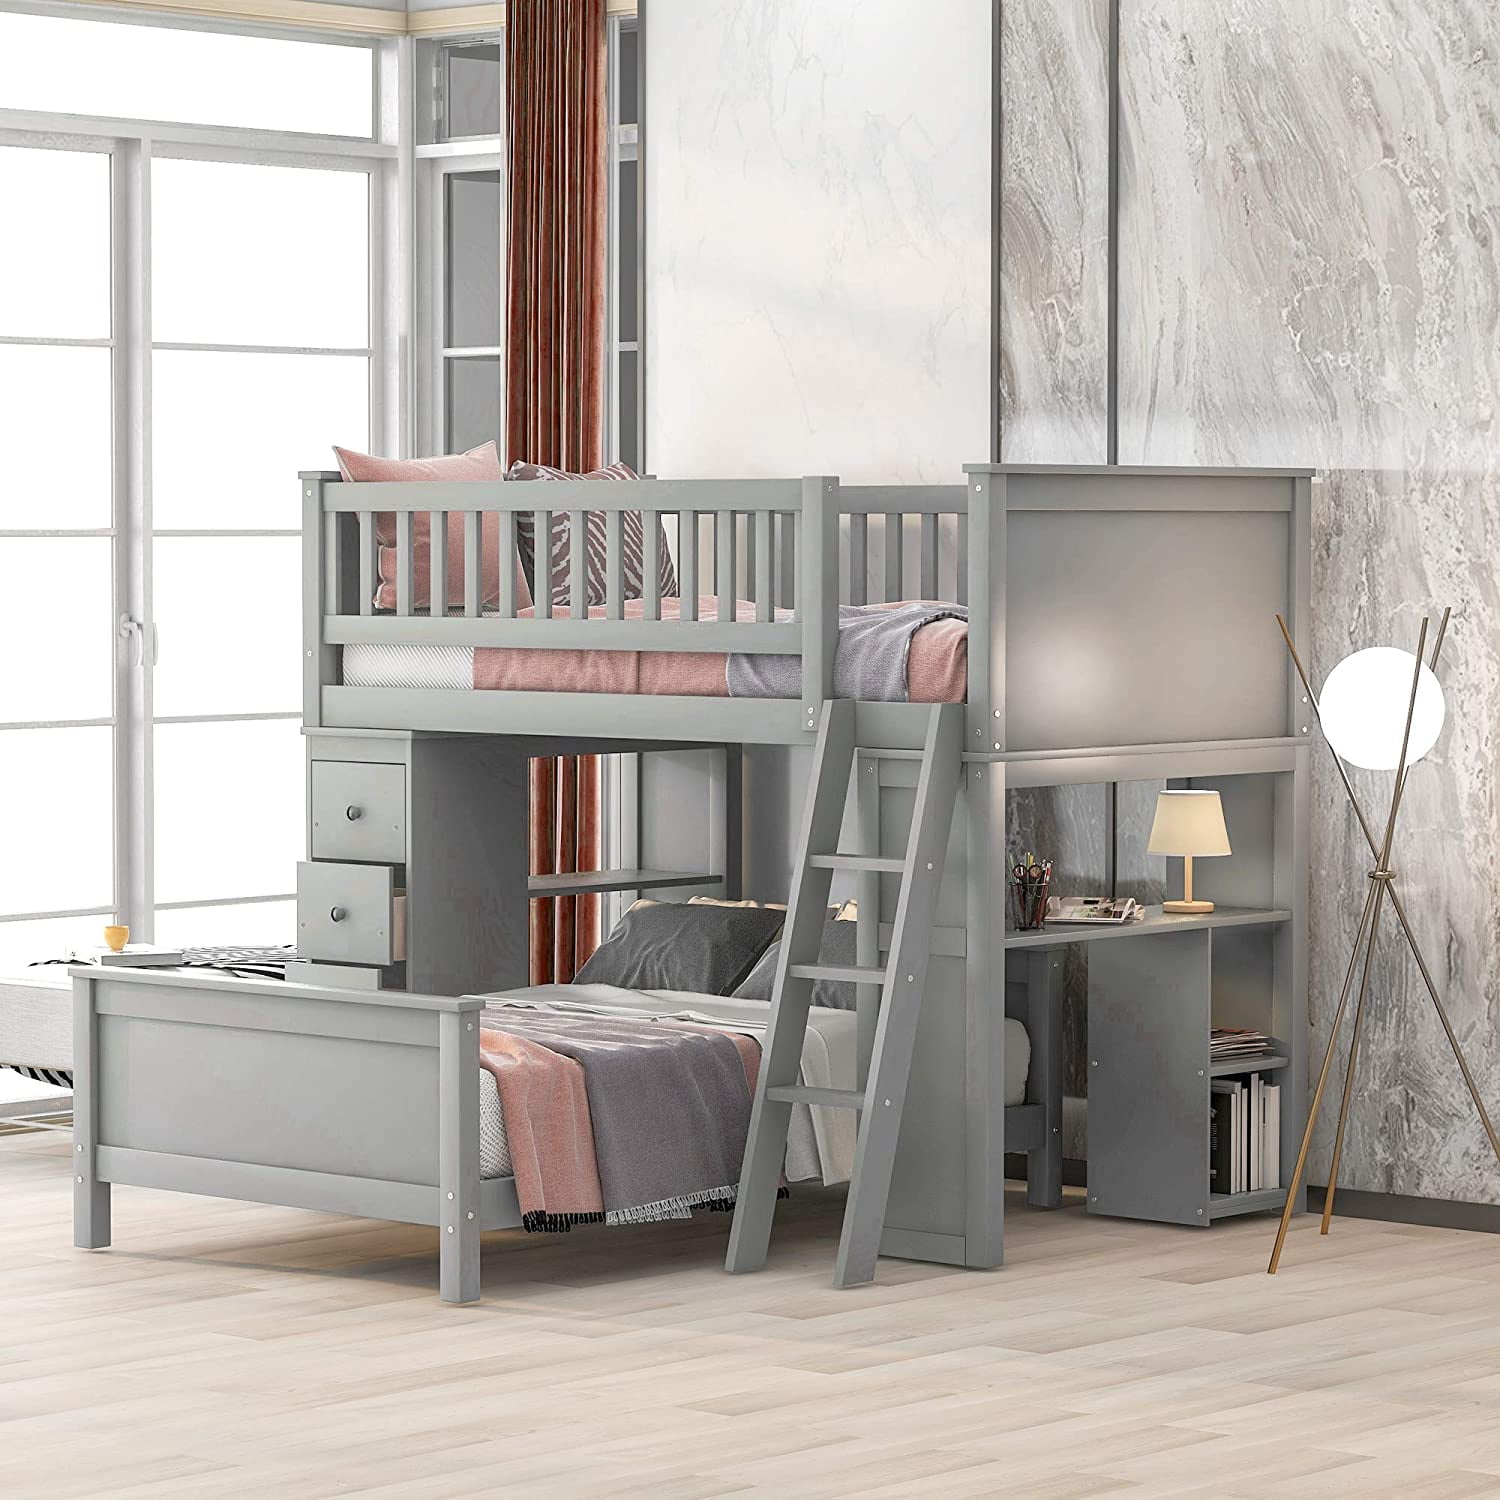 Bunk Bed Twin Over Loft, Loft Twin Bed Frame With Storage